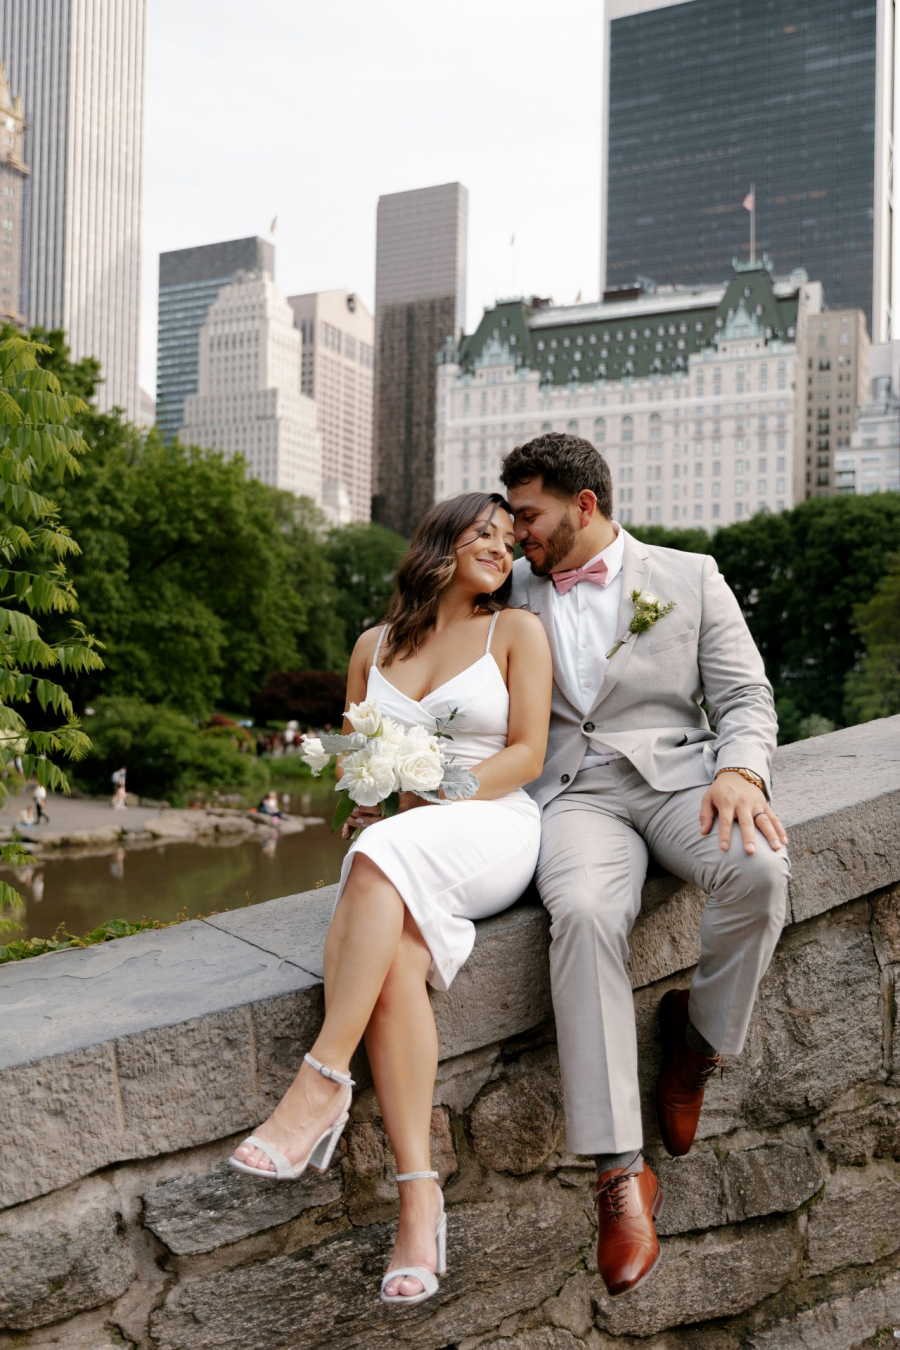 Simple wedding in Central Park NY 20